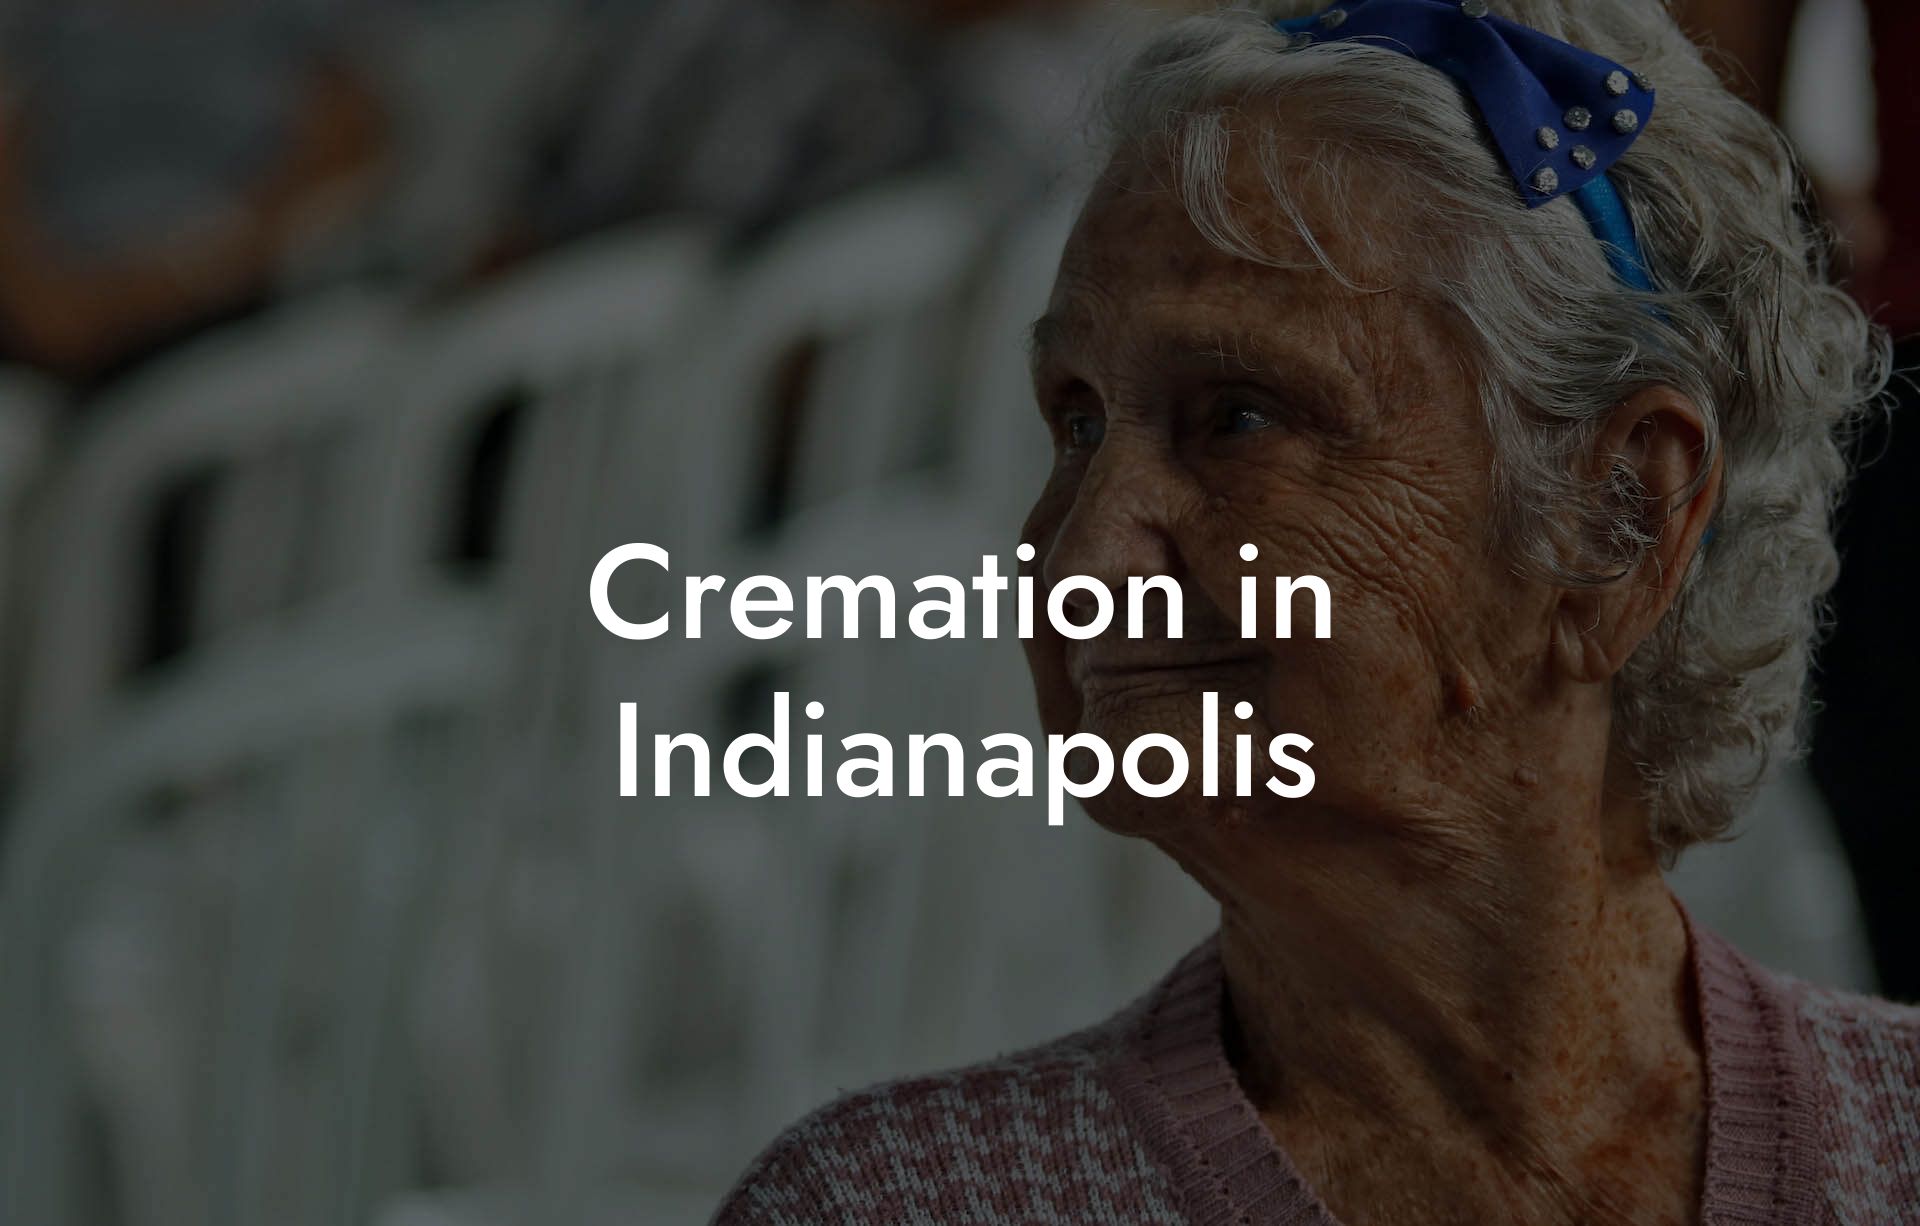 Cremation in Indianapolis